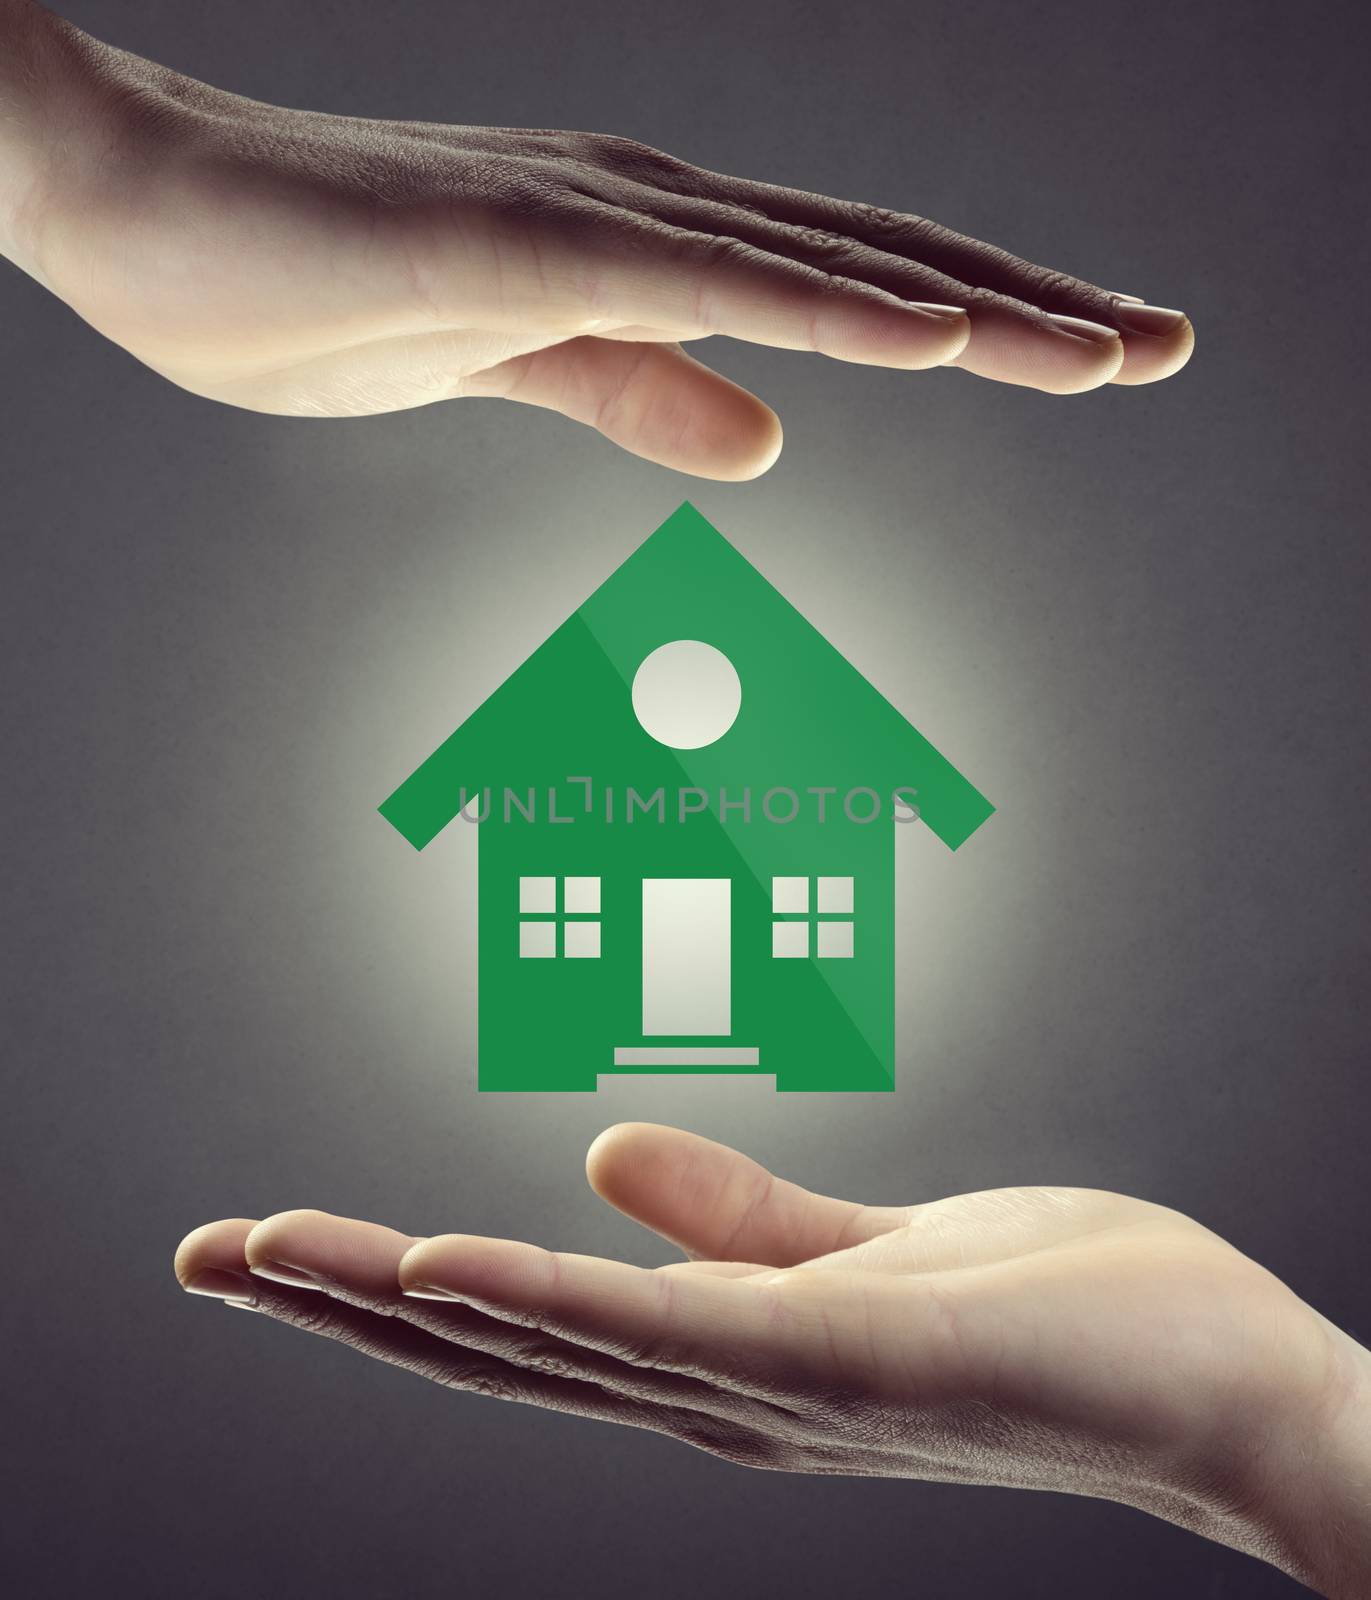 Hands protecting green house icon on white background, home insurance and safety concept.